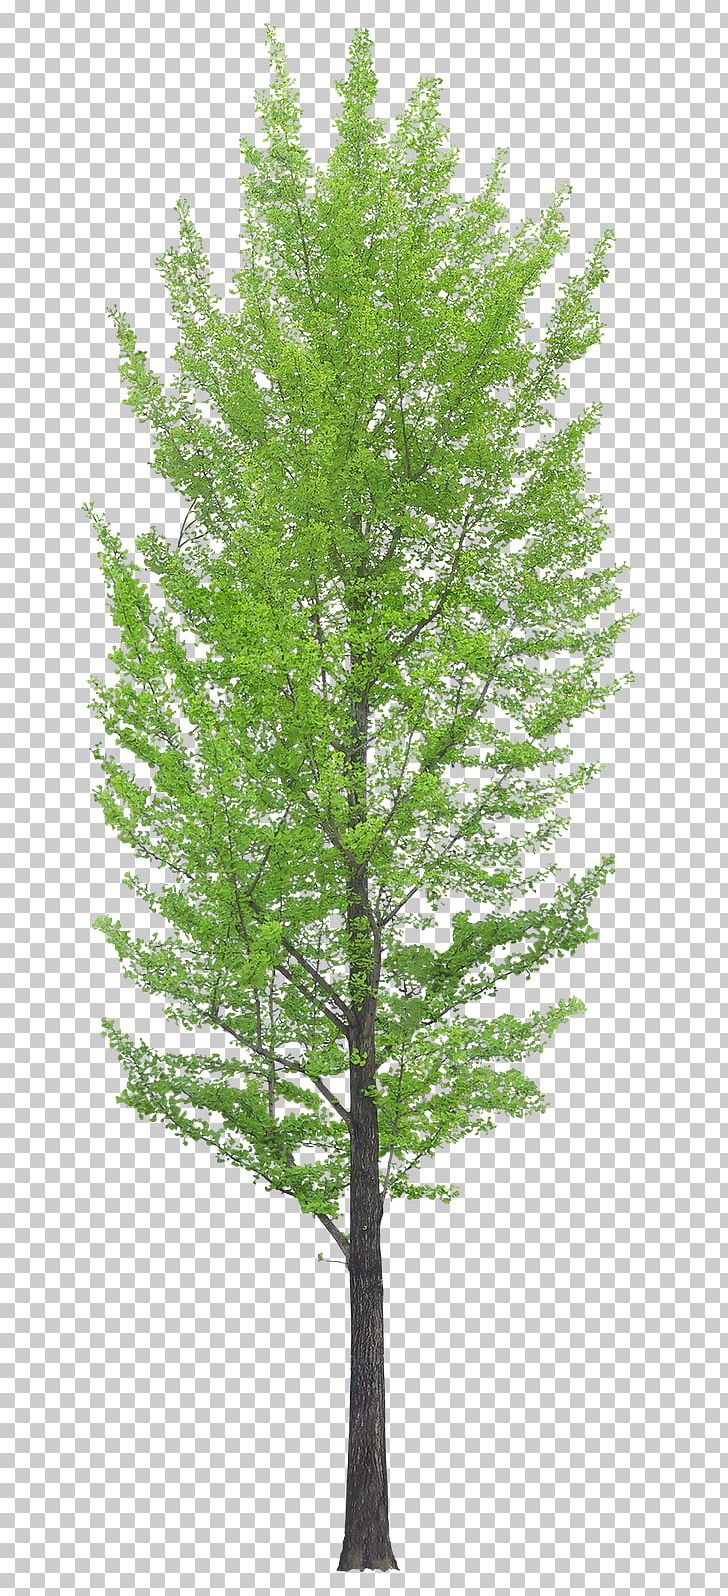 Tree Desktop PNG, Clipart, Biome, Branch, Clip Art, Computer Icons, Conifer Free PNG Download